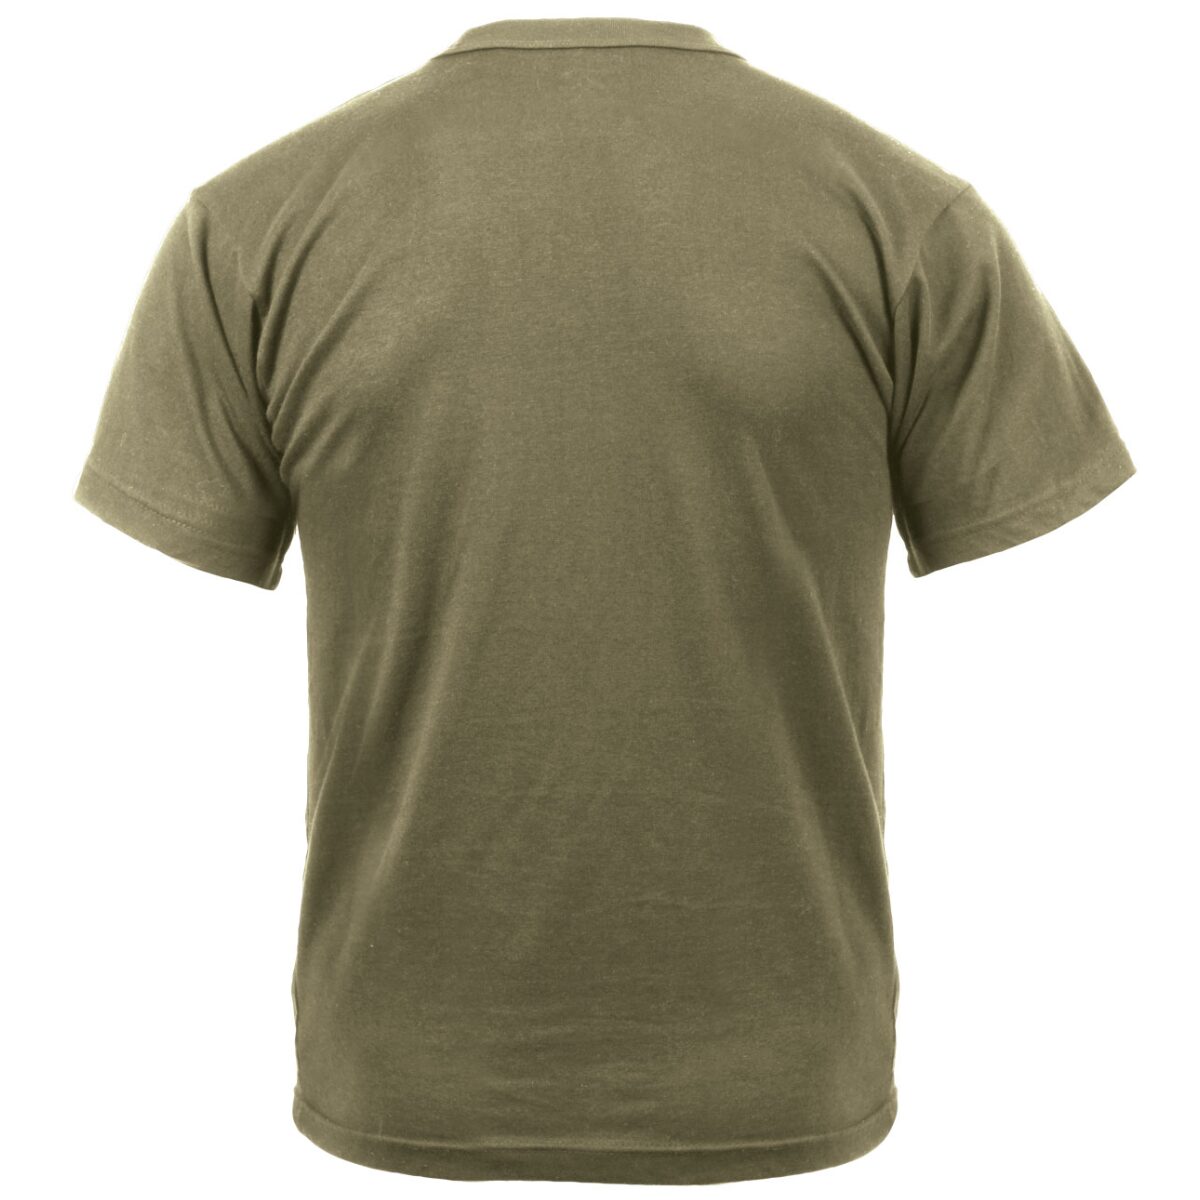 Coyote Brown Cotton T-Shirt